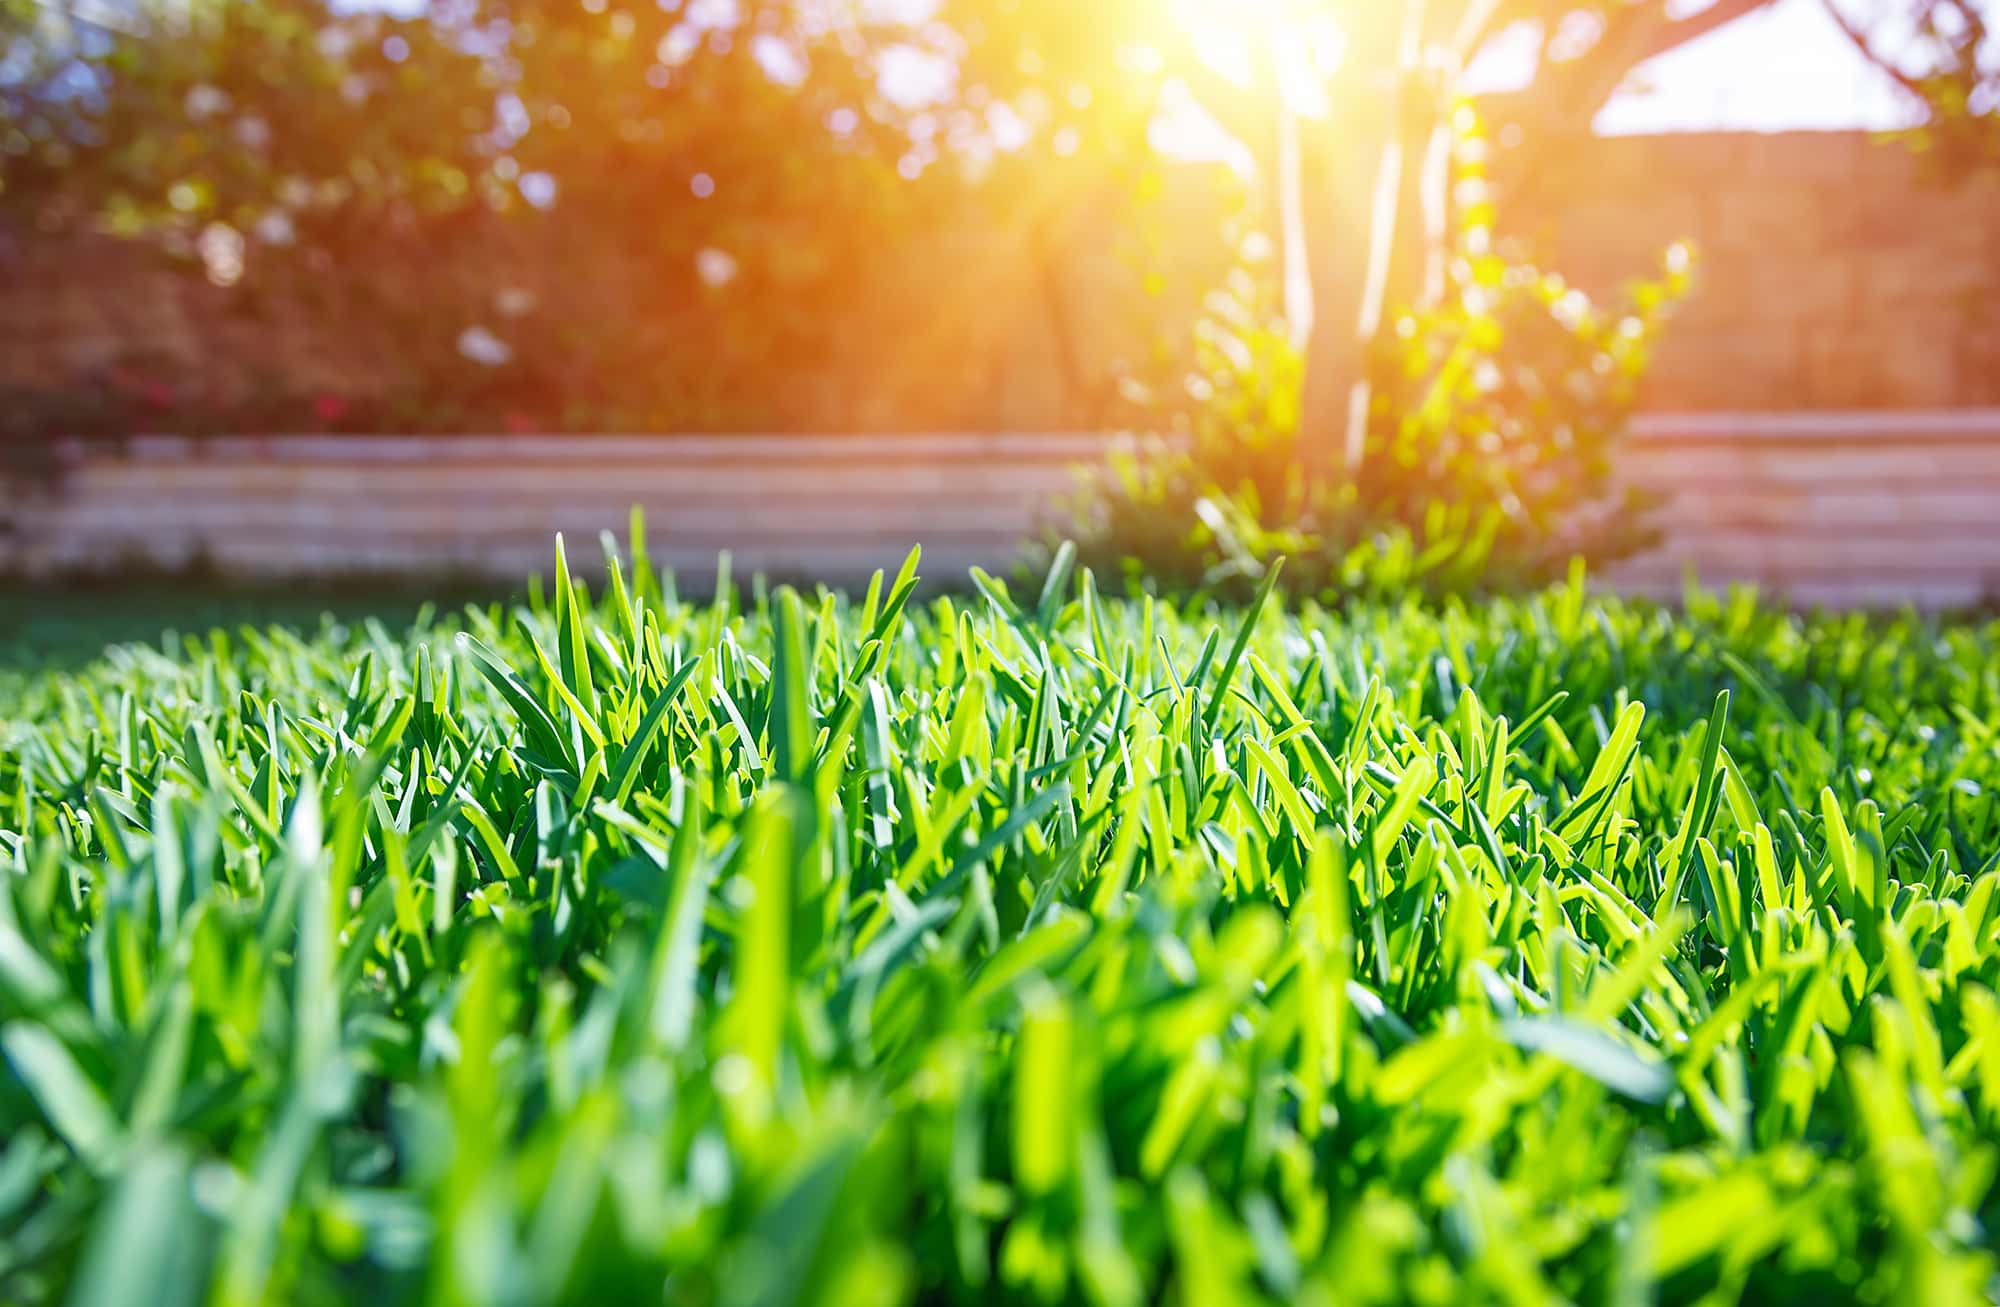 Take care of your lawn & garden the easy way this summer - with a